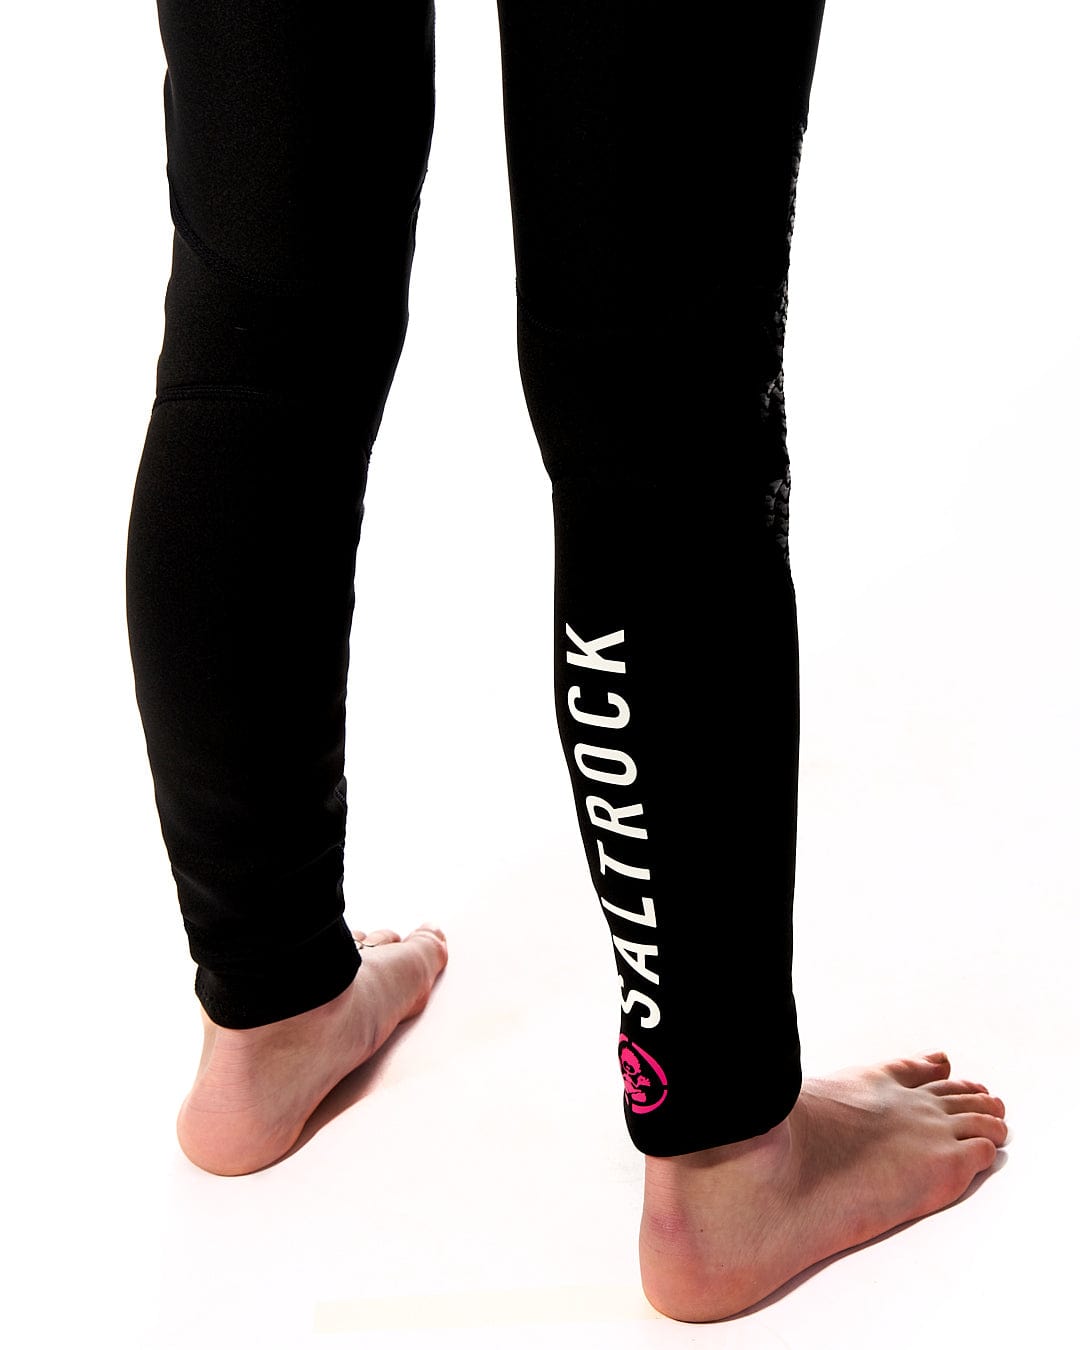 A woman wearing a pair of Zephyr - Kids 3/2 Full Wetsuit - Black leggings with a pink Saltrock logo.